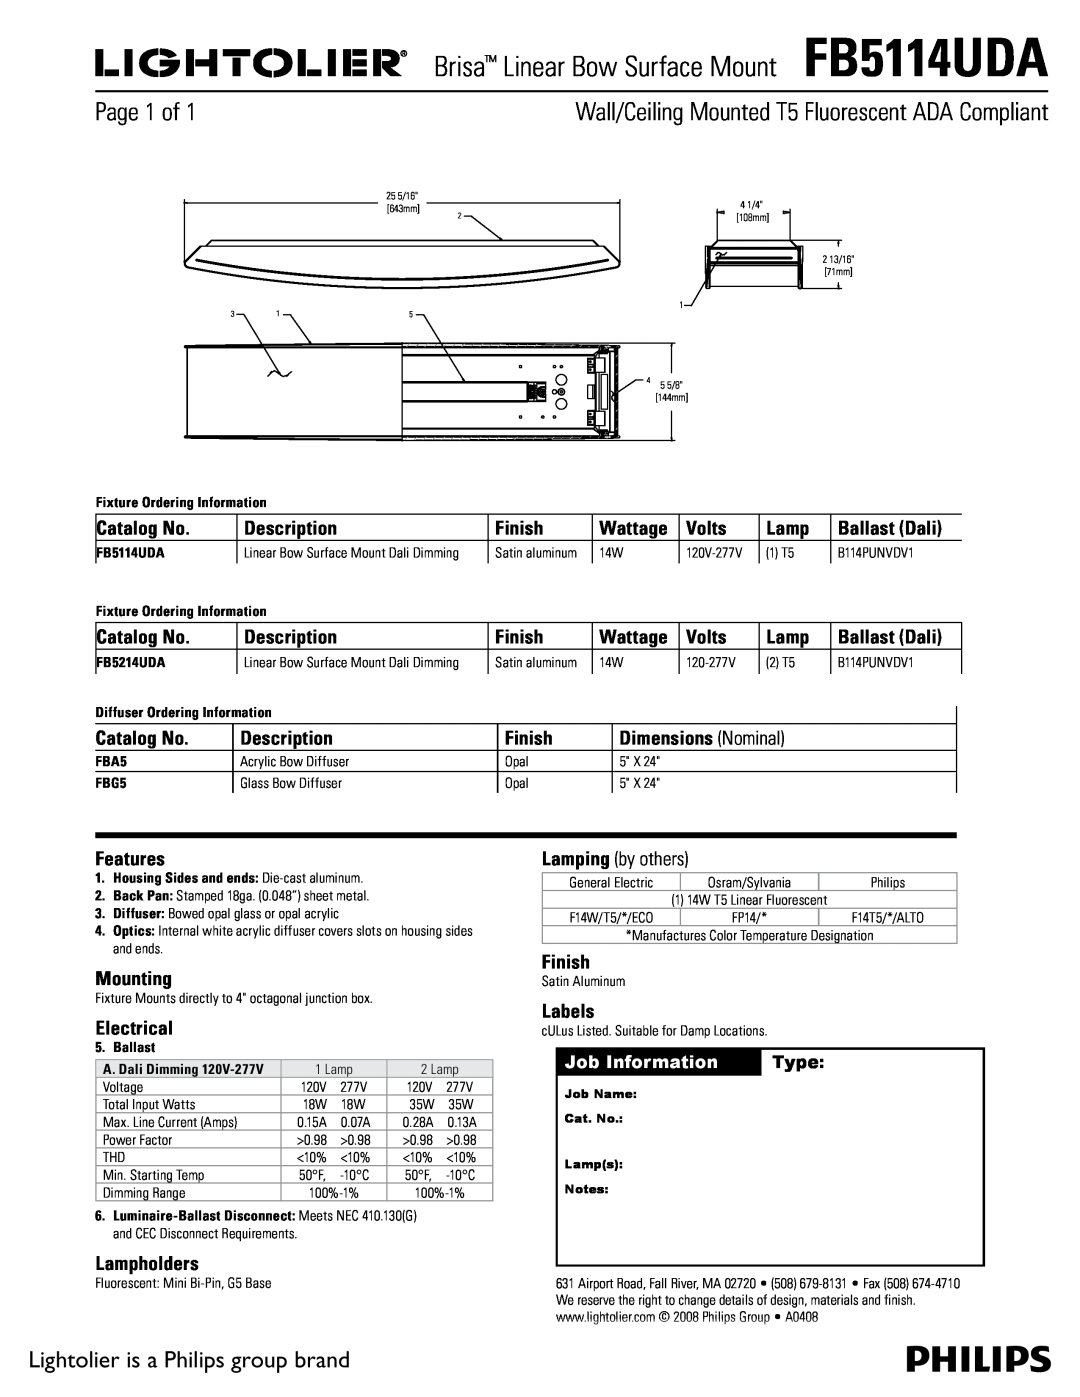 Lightolier FB5114UDA dimensions Page of, Wall/Ceiling Mounted T5 Fluorescent ADA Compliant 